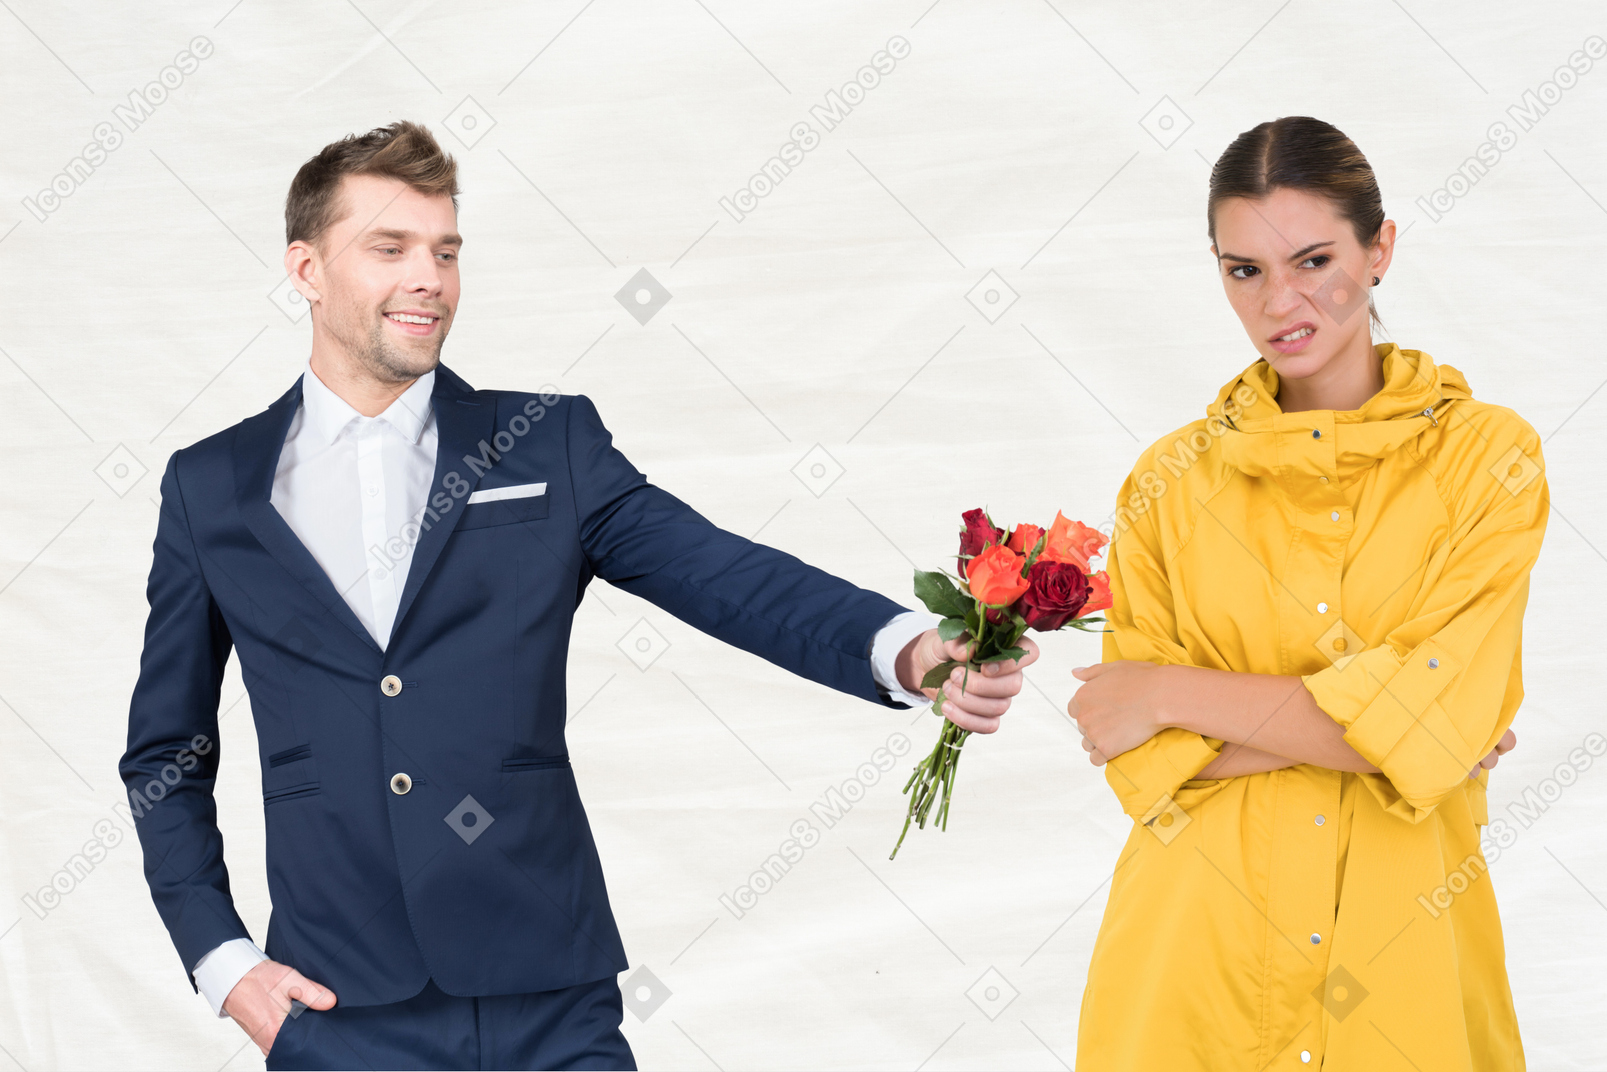 Man in blue suit giving bouquet to angry woman in yellow raincoat